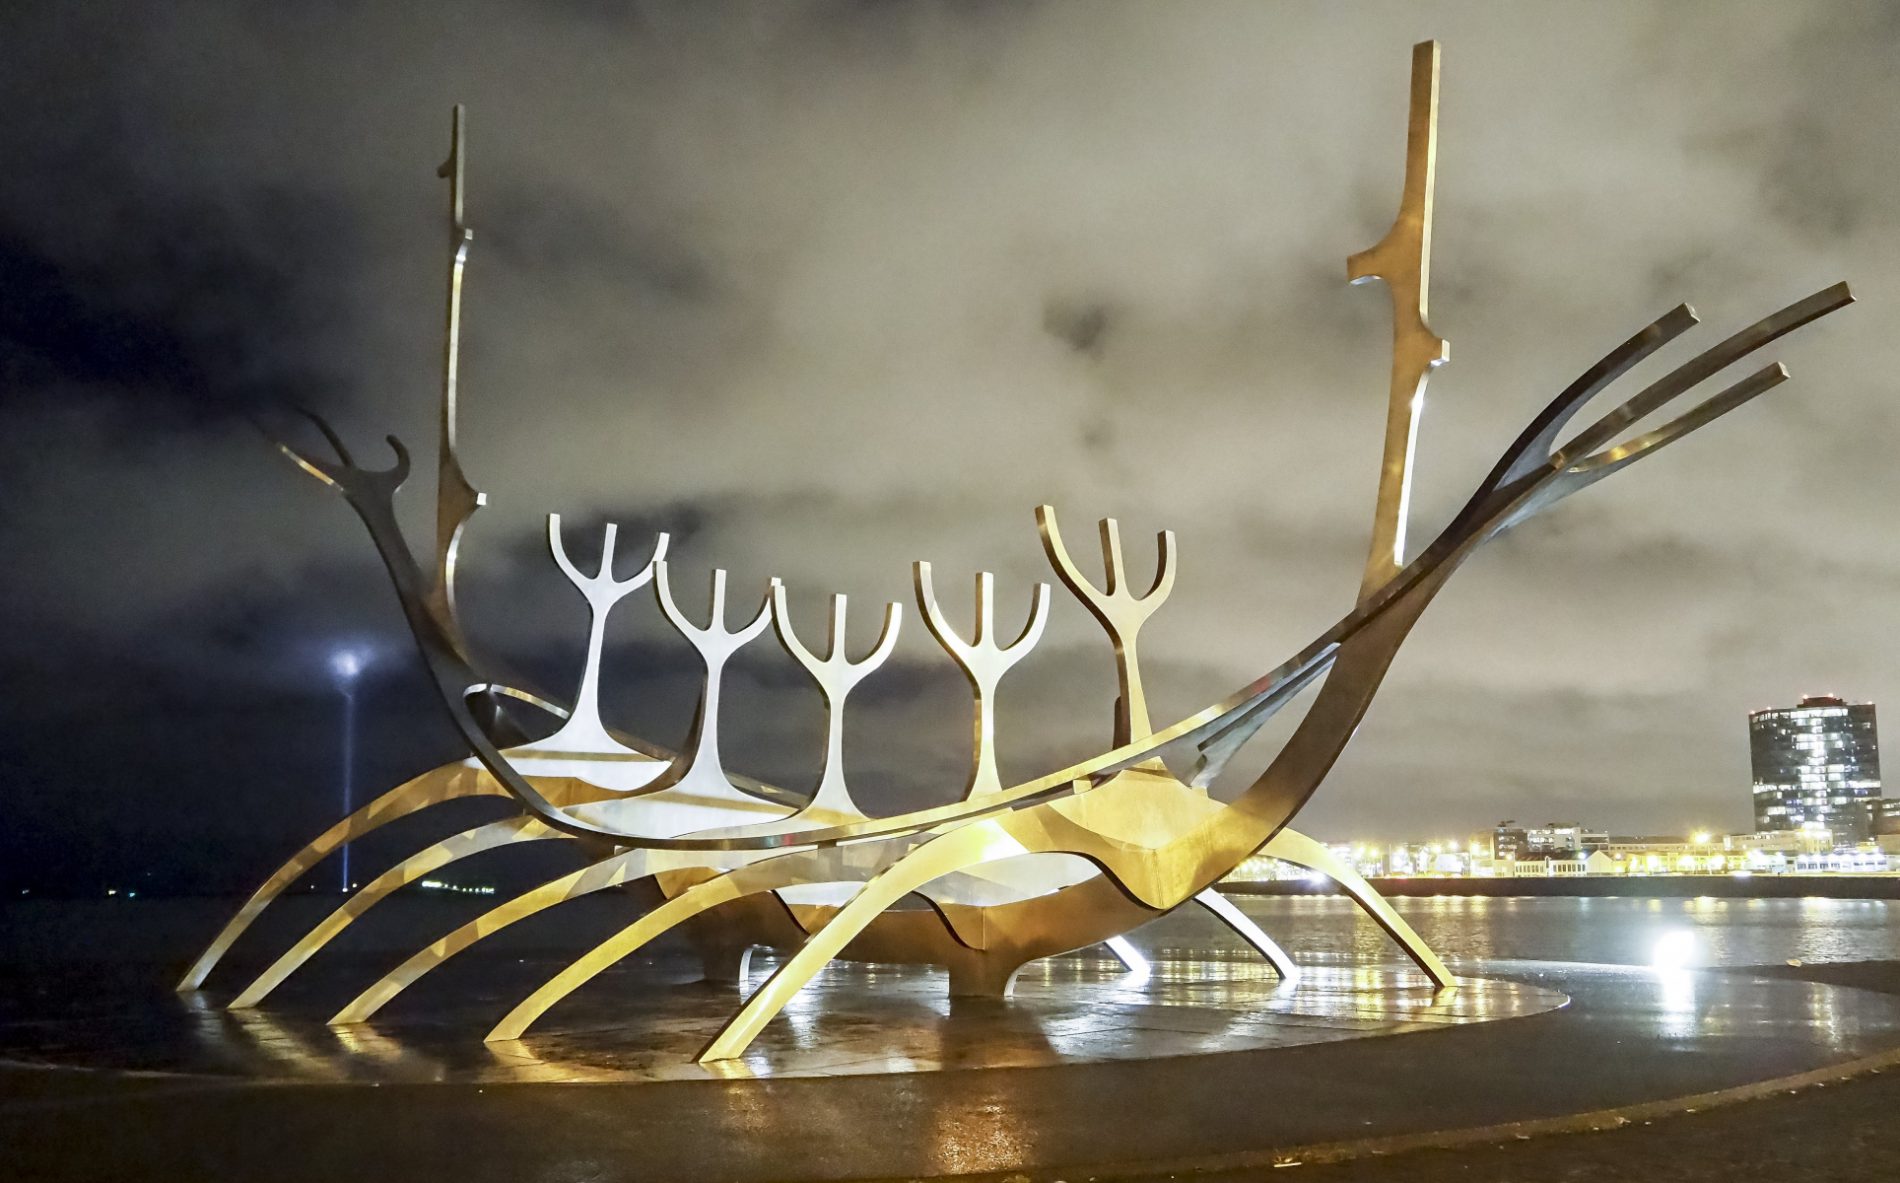 The Sun Voyager From Reykjavik Iceland Wallpaper